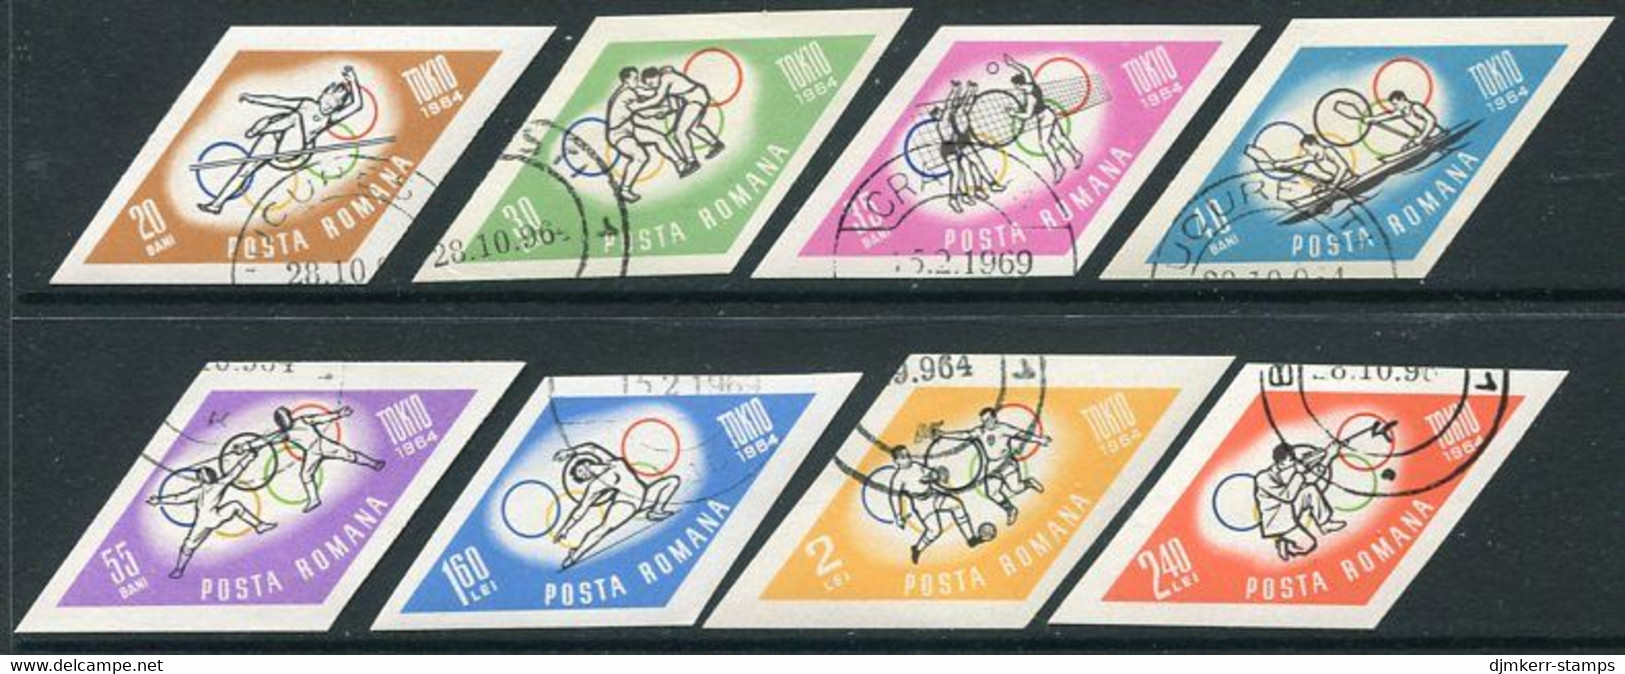 ROMANIA 1964 Tokyo Olympic Games Imperforate Used.  Michel 2317-24 - Usati